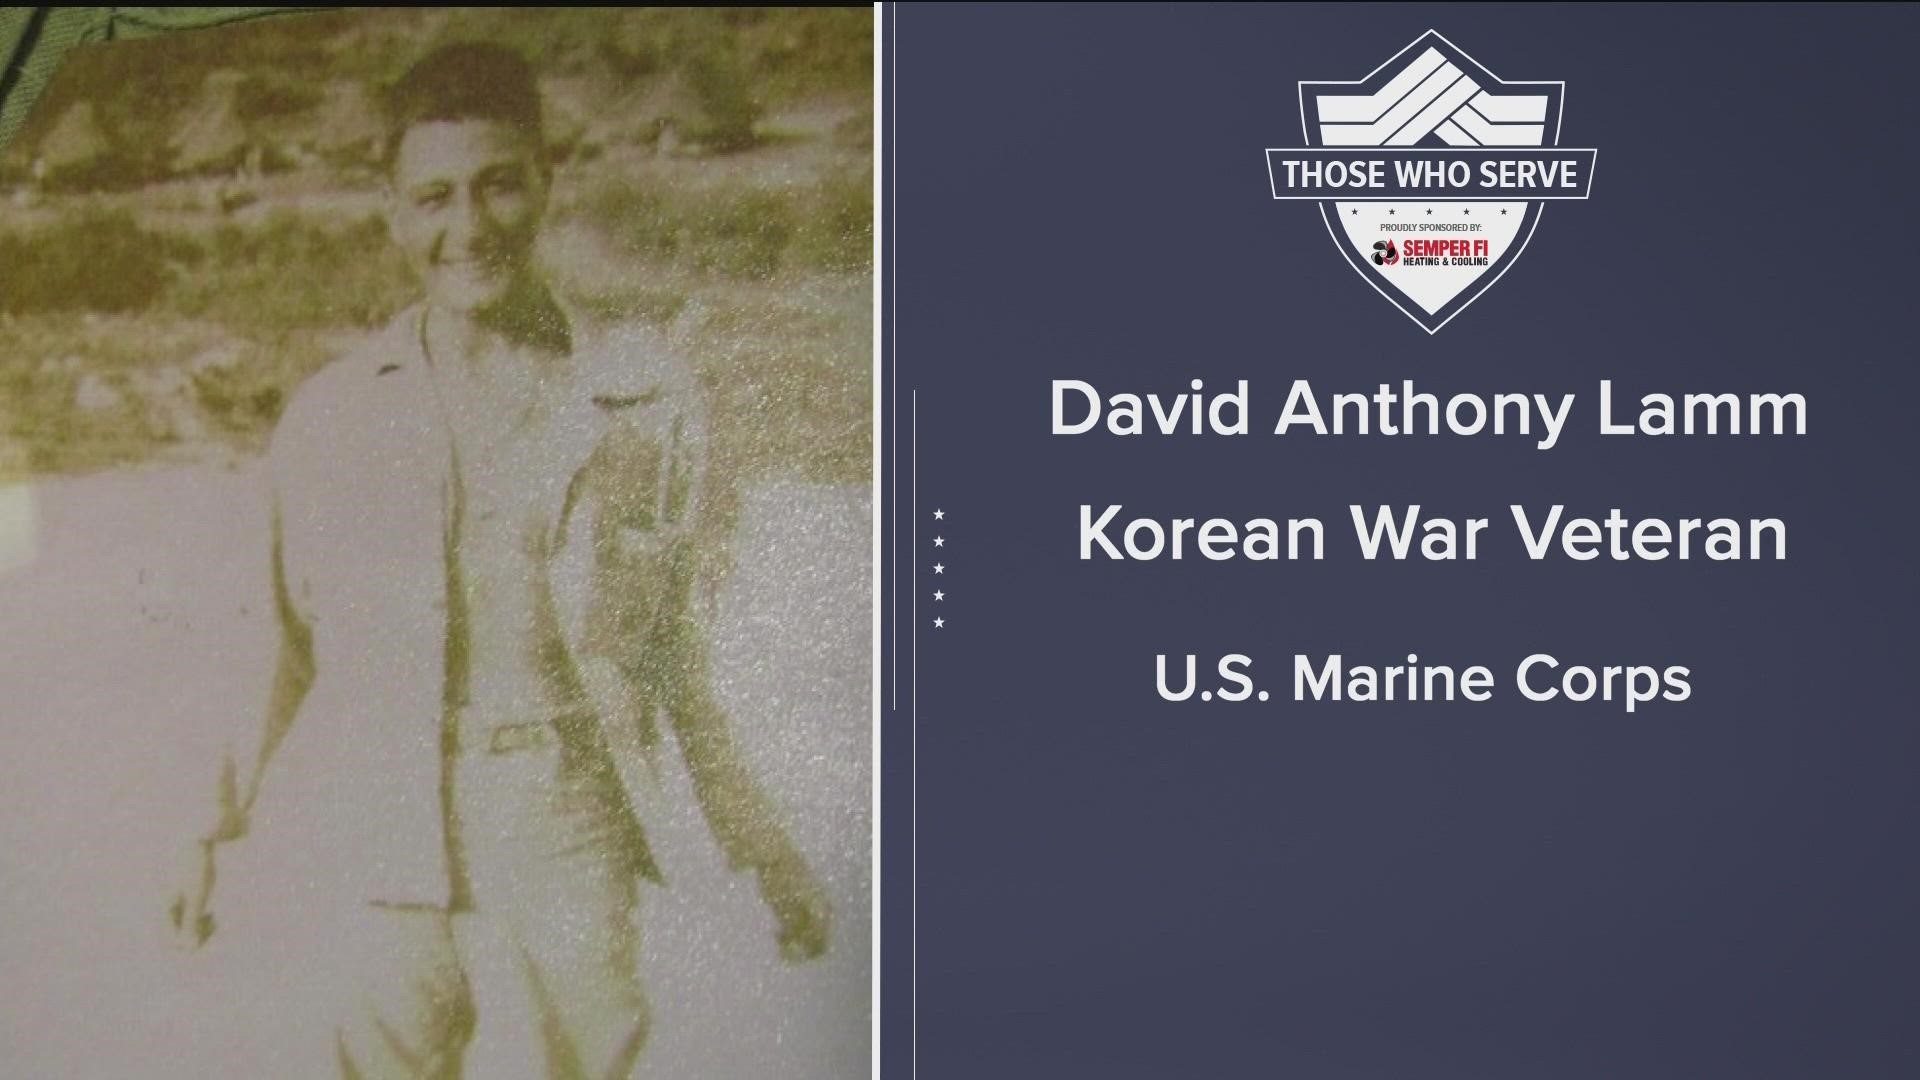 Today we hono Korean War Veteran David Anthony Lamm for our "Those Who Serve" series.